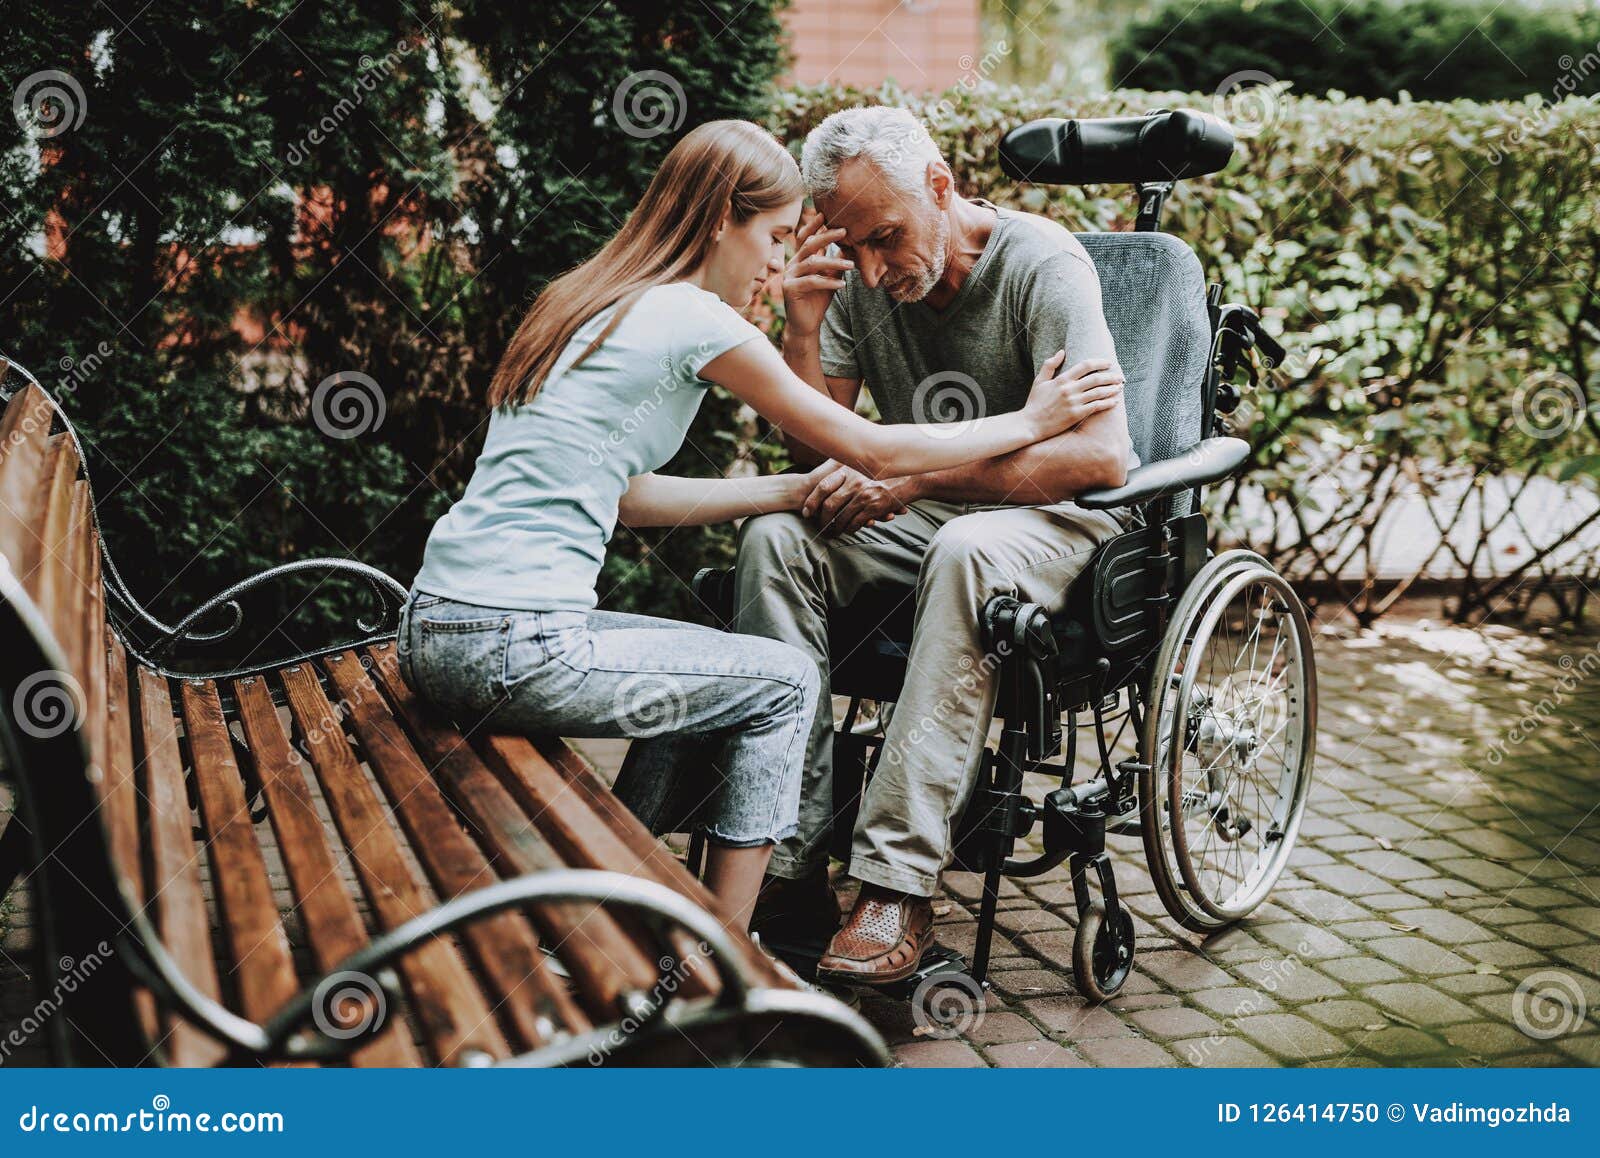 young girl old guy free photo